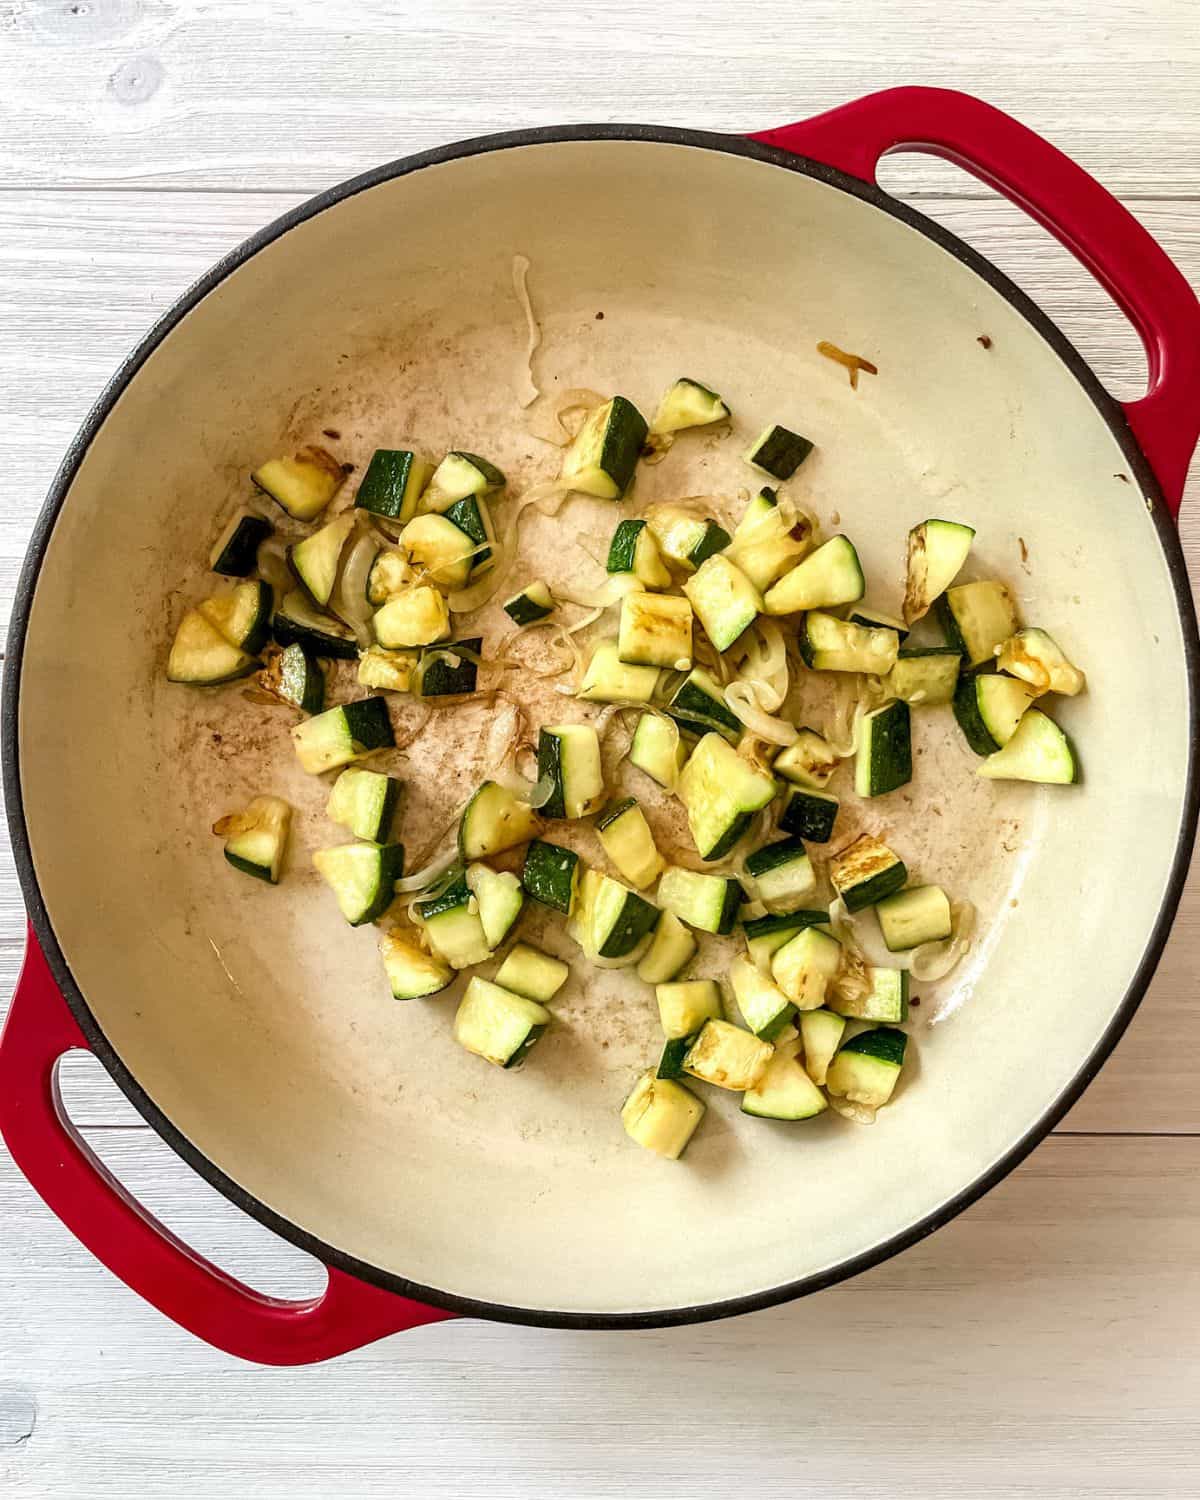 Sautéed zucchini and onion in a red skillet.